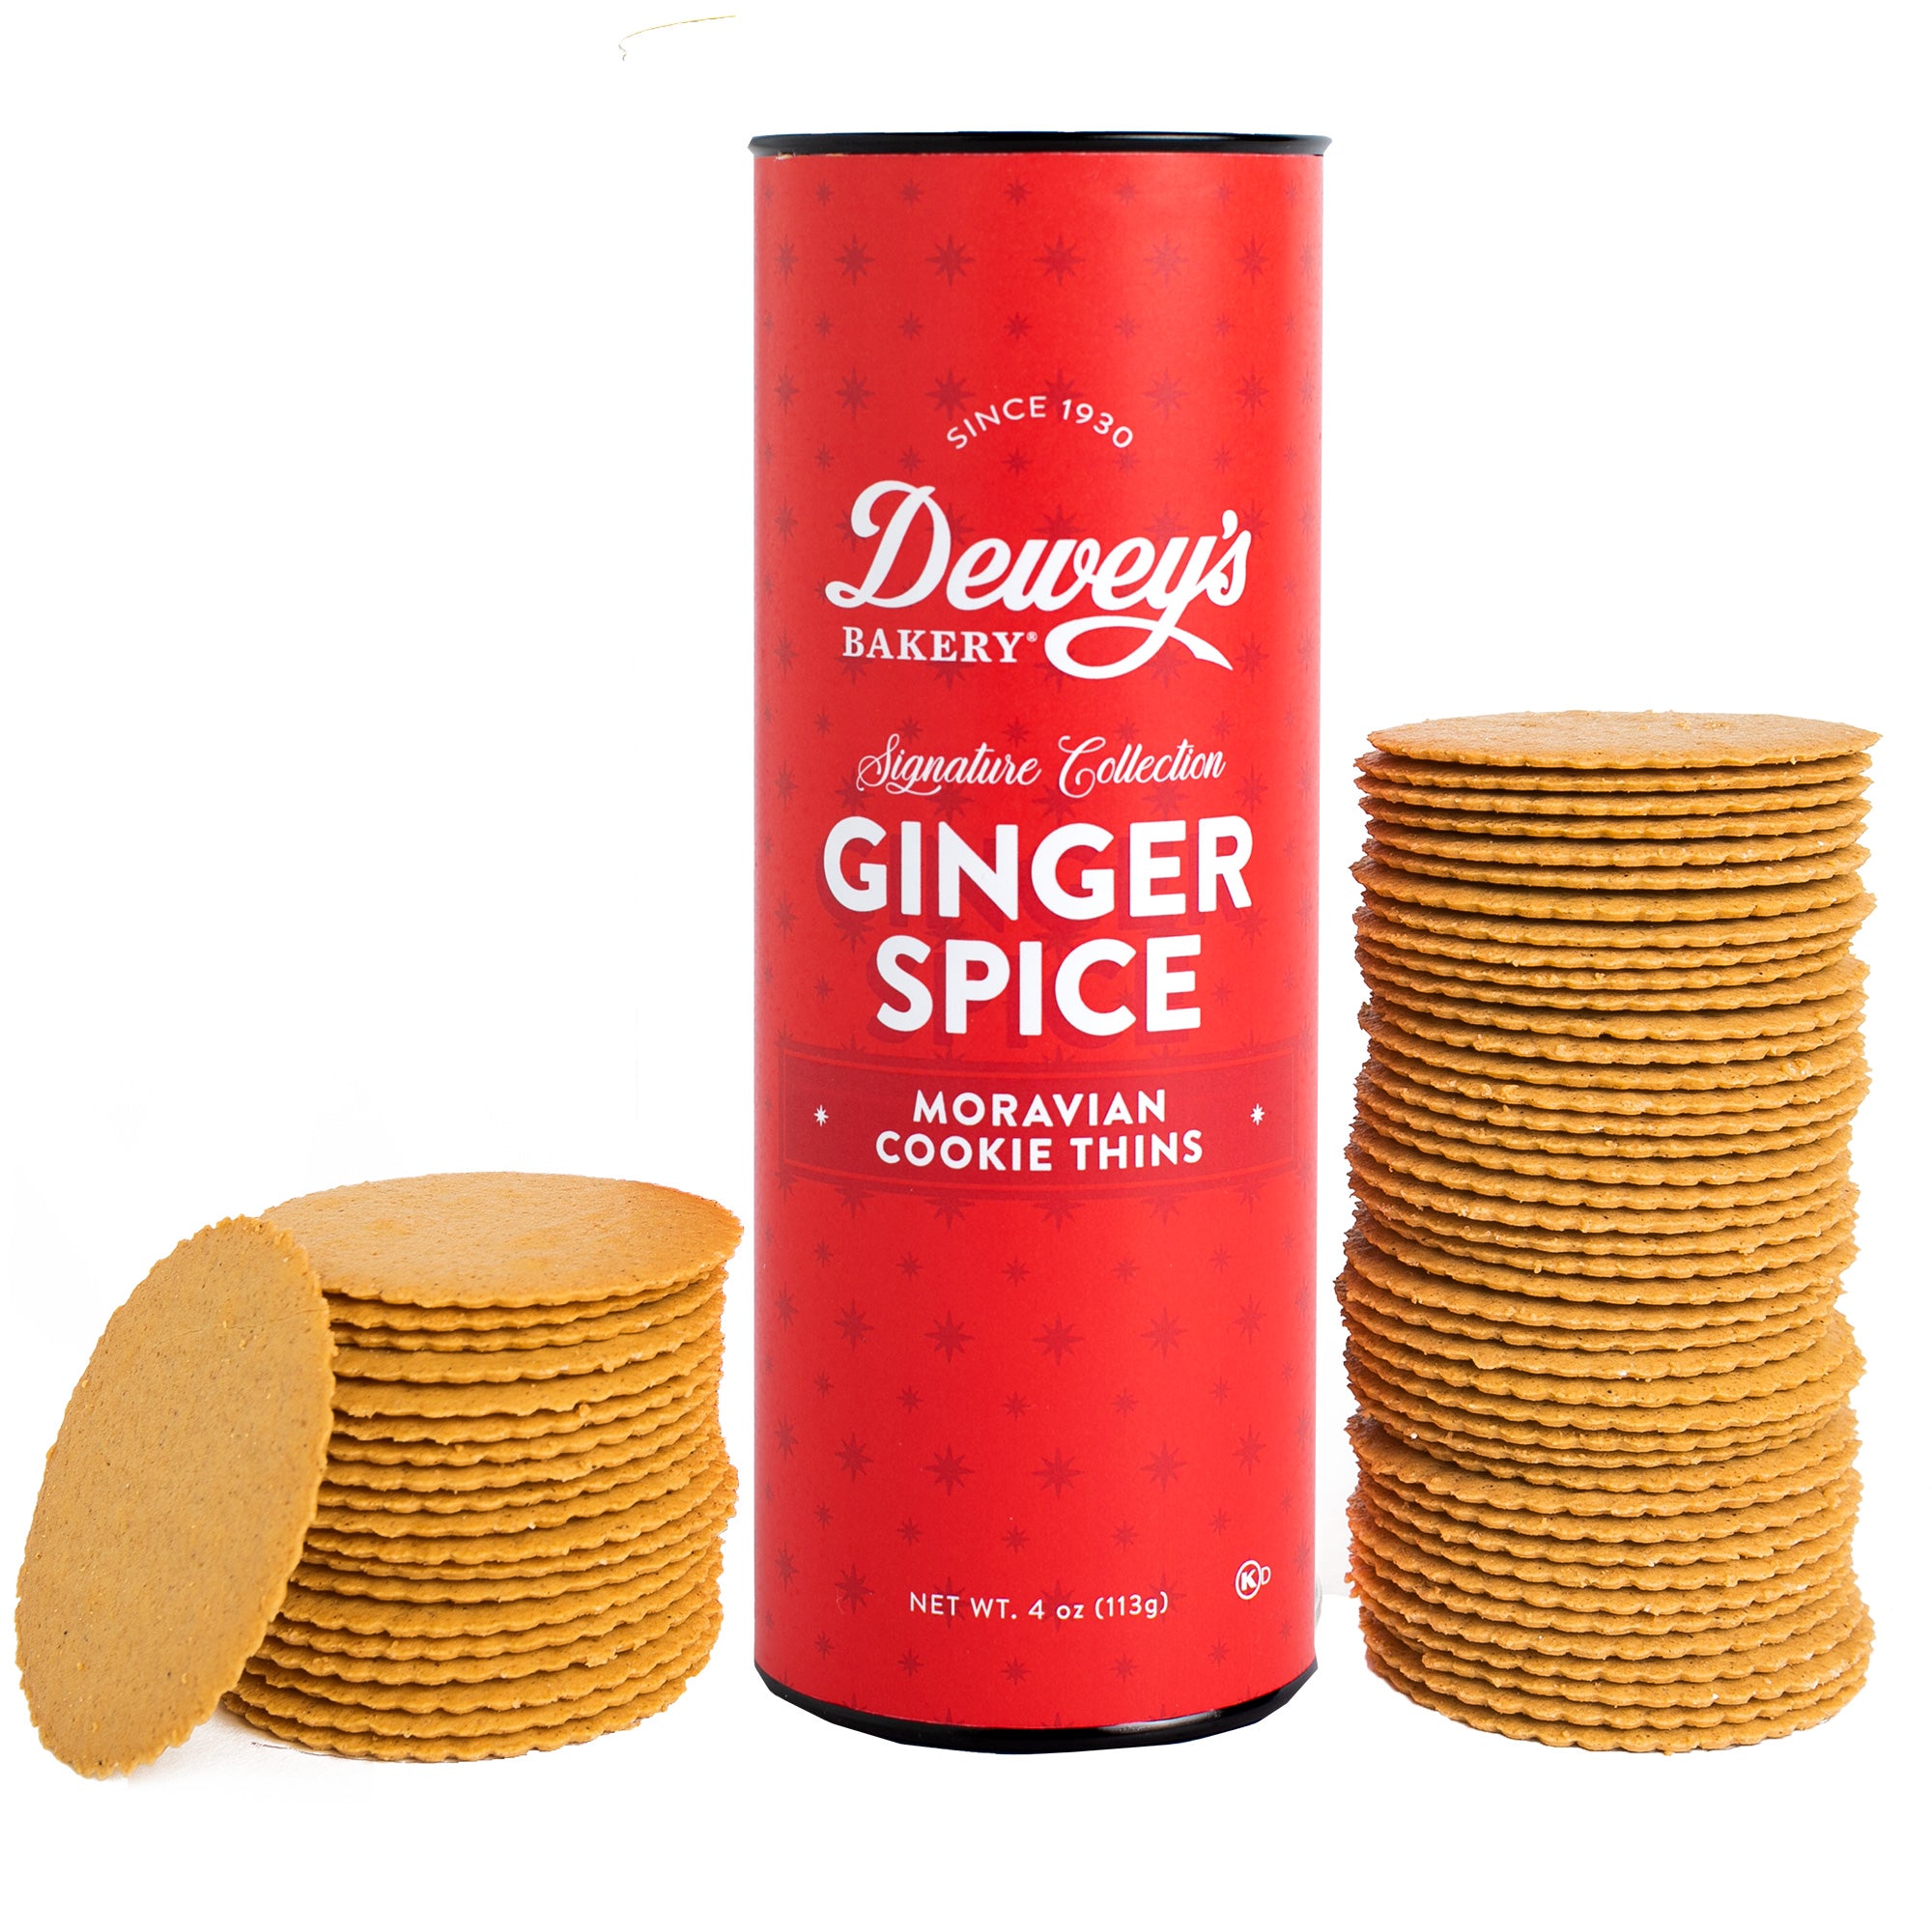 Ginger Spice Moravian Cookie Thins Tube